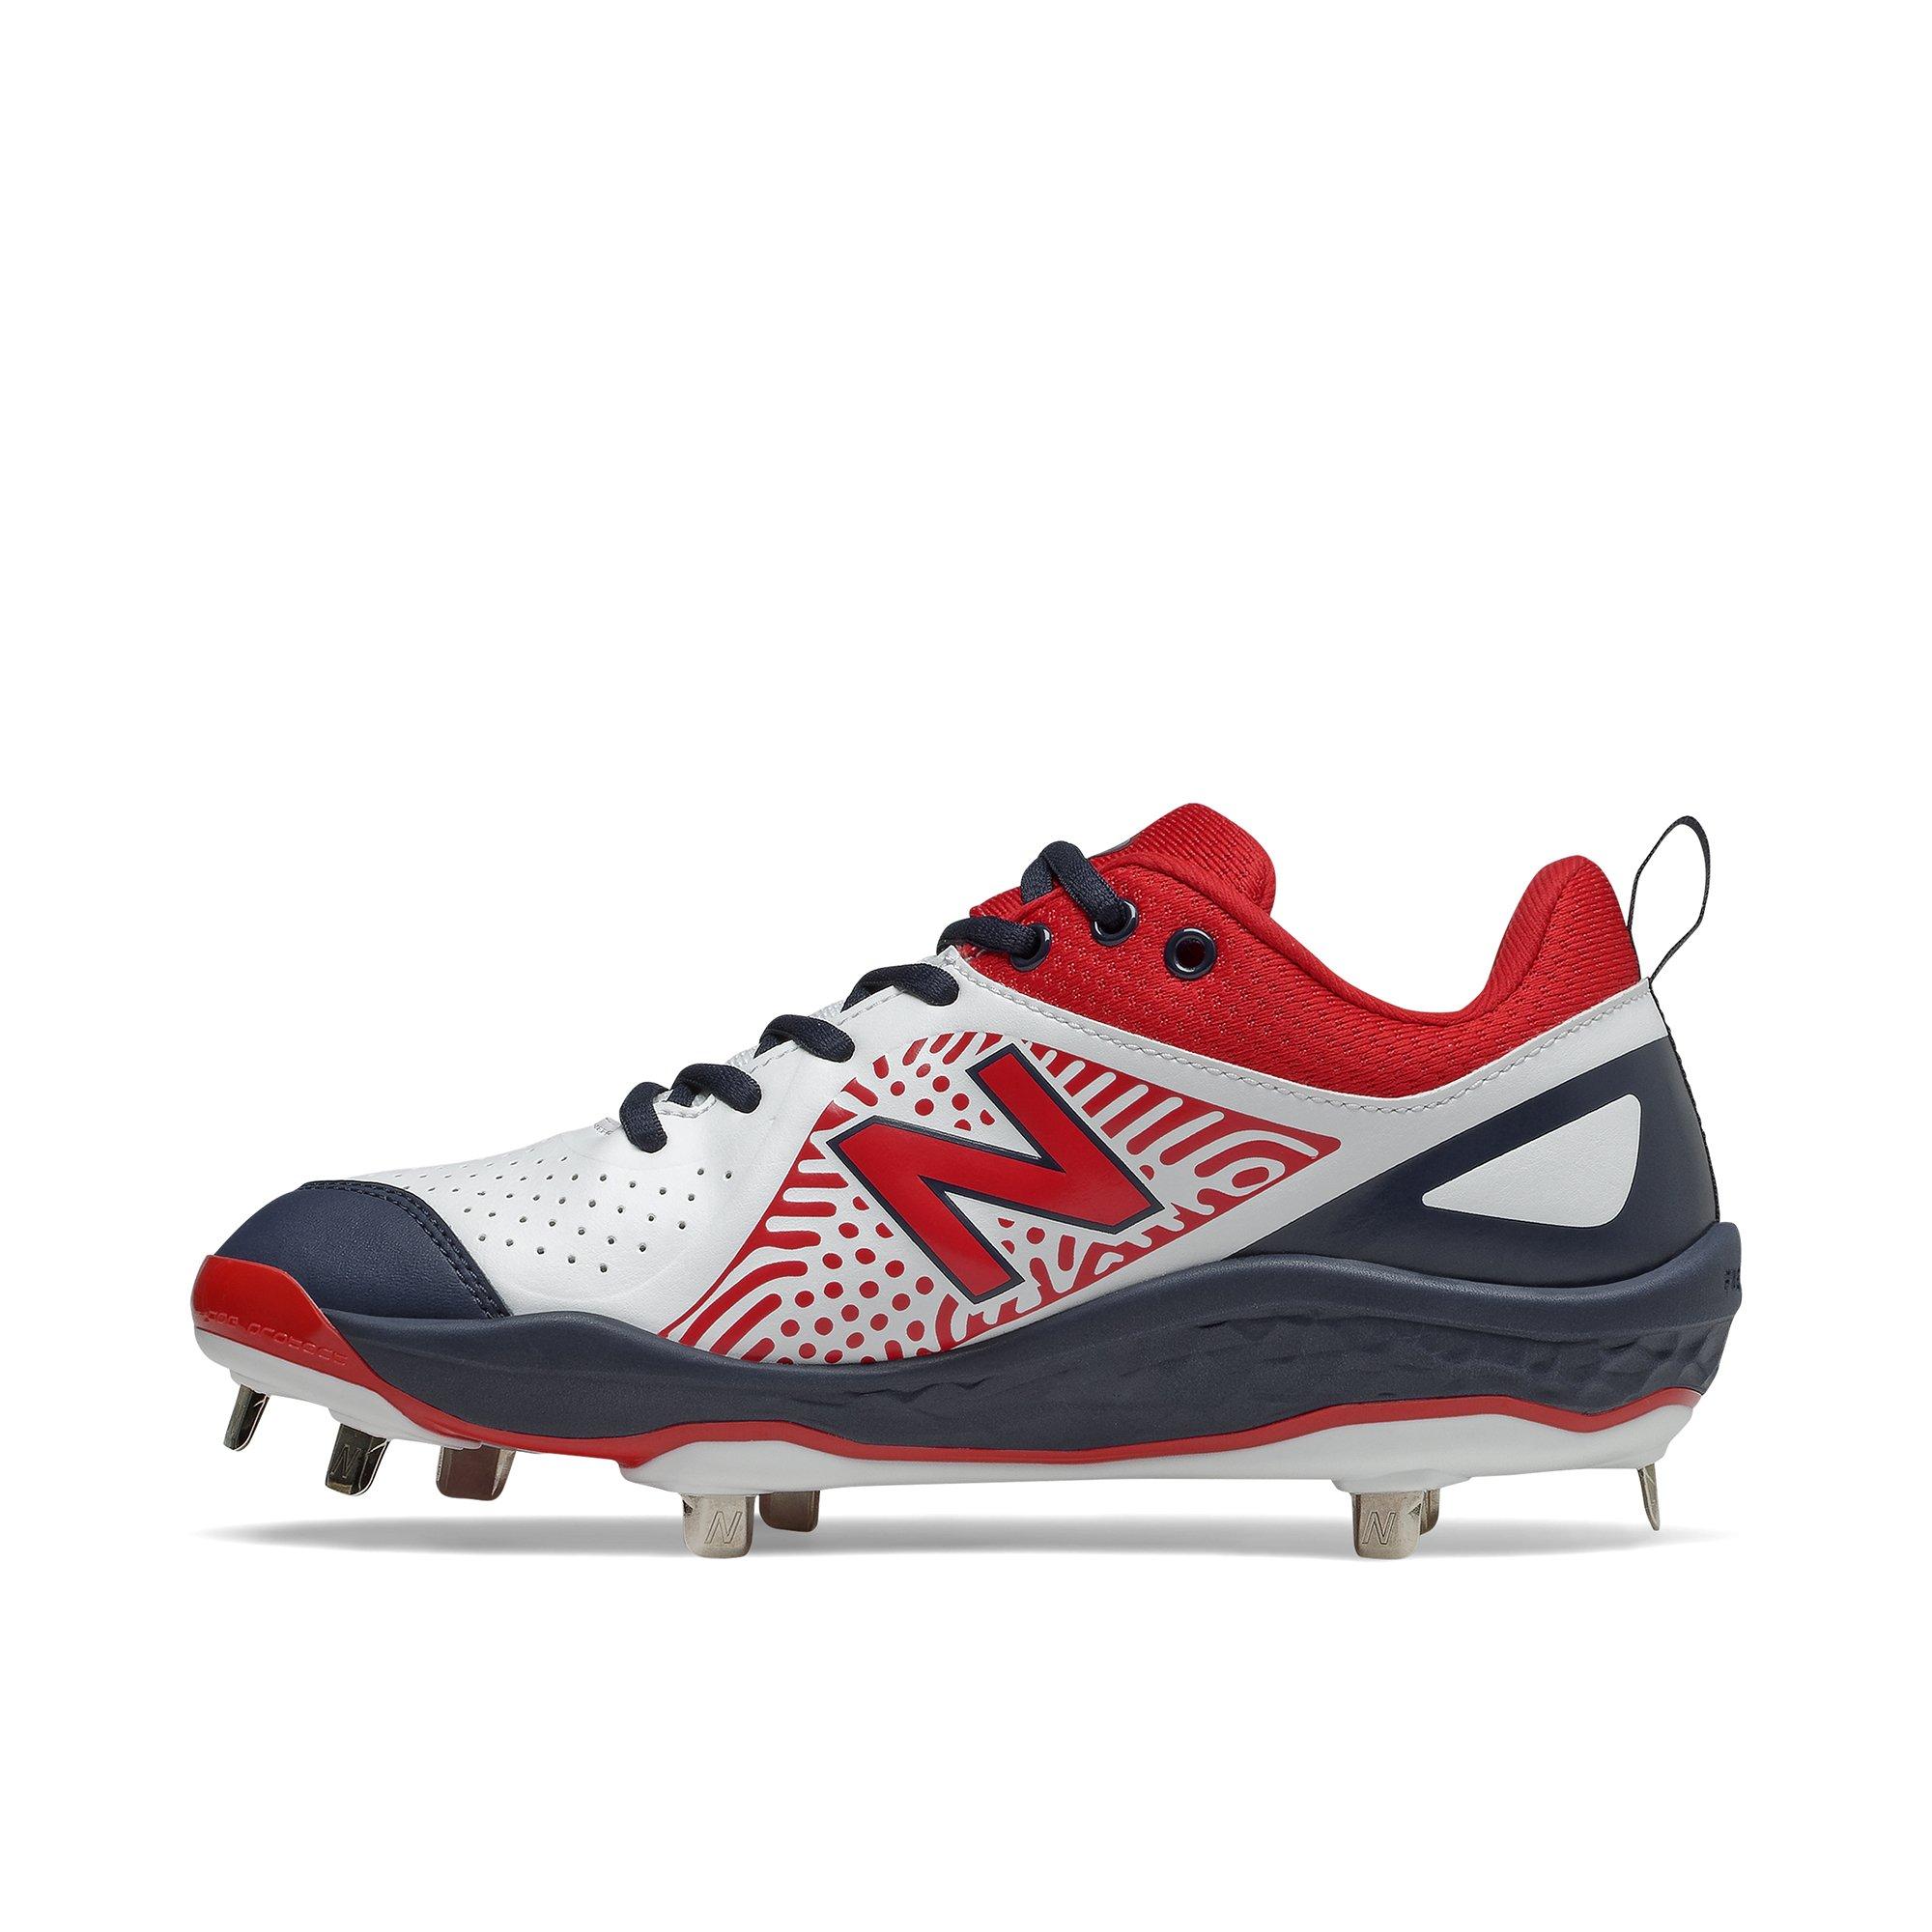 red white and blue new balance cleats